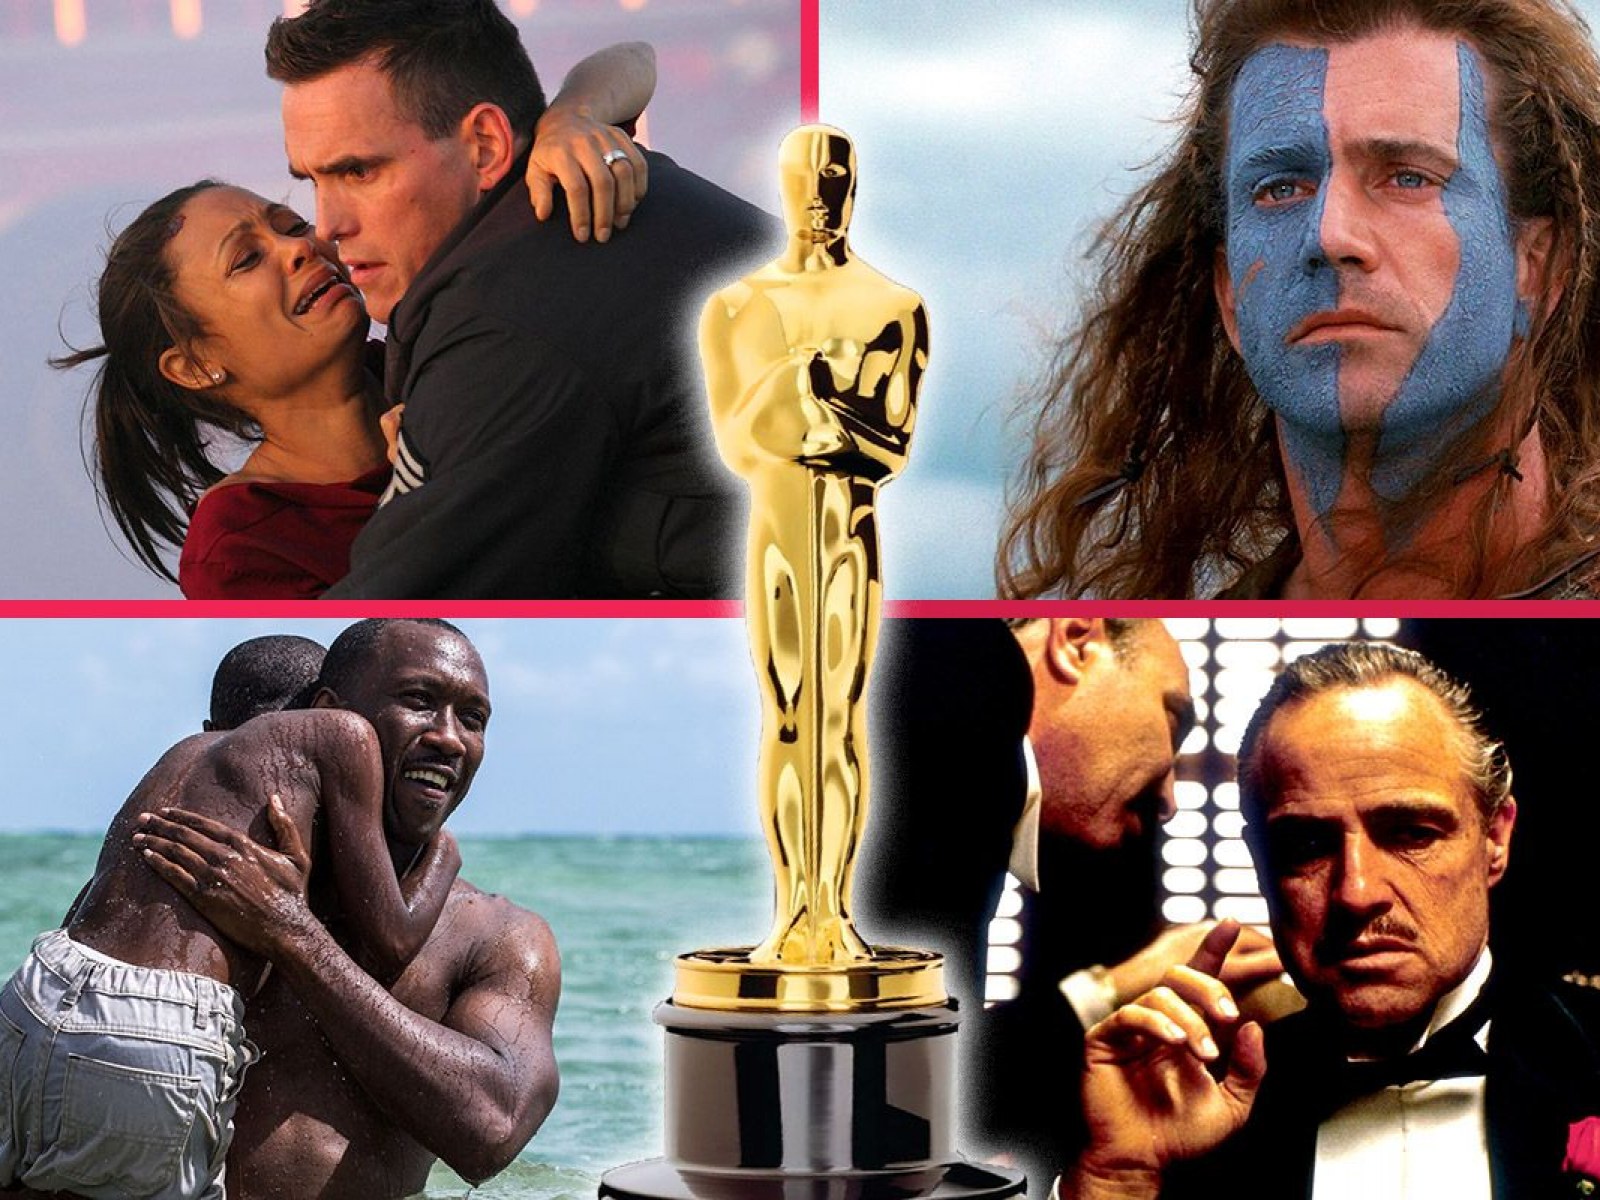 The Top 5 Best Picture Winners at the Oscars in the Past Decade